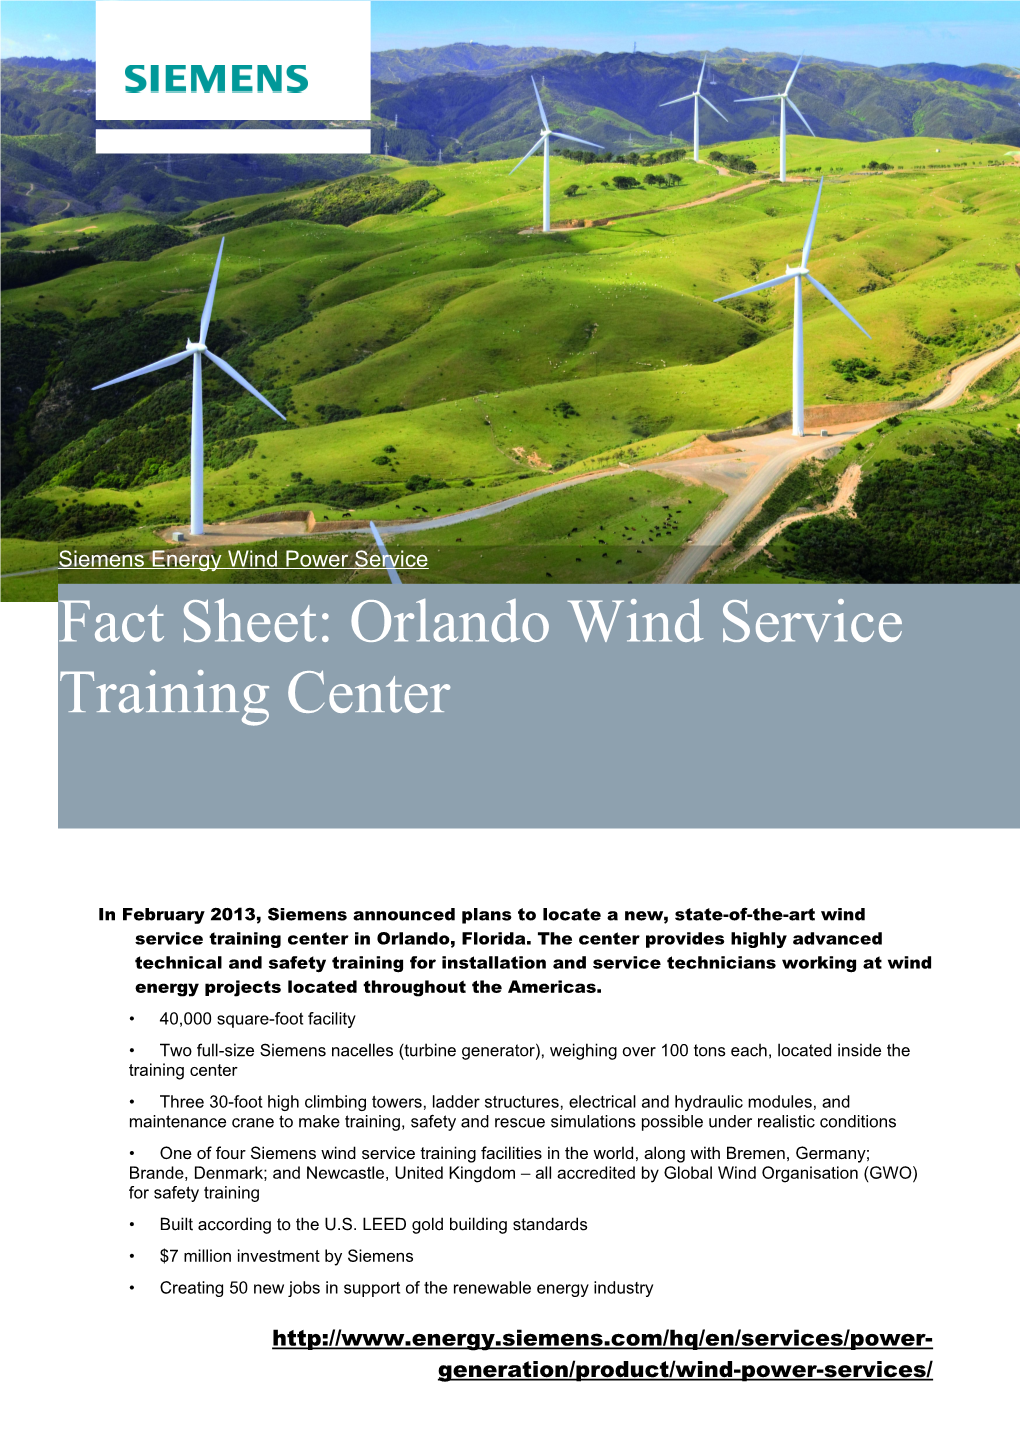 In February 2013, Siemens Announced Plans to Locate a New, State-Of-The-Art Wind Service